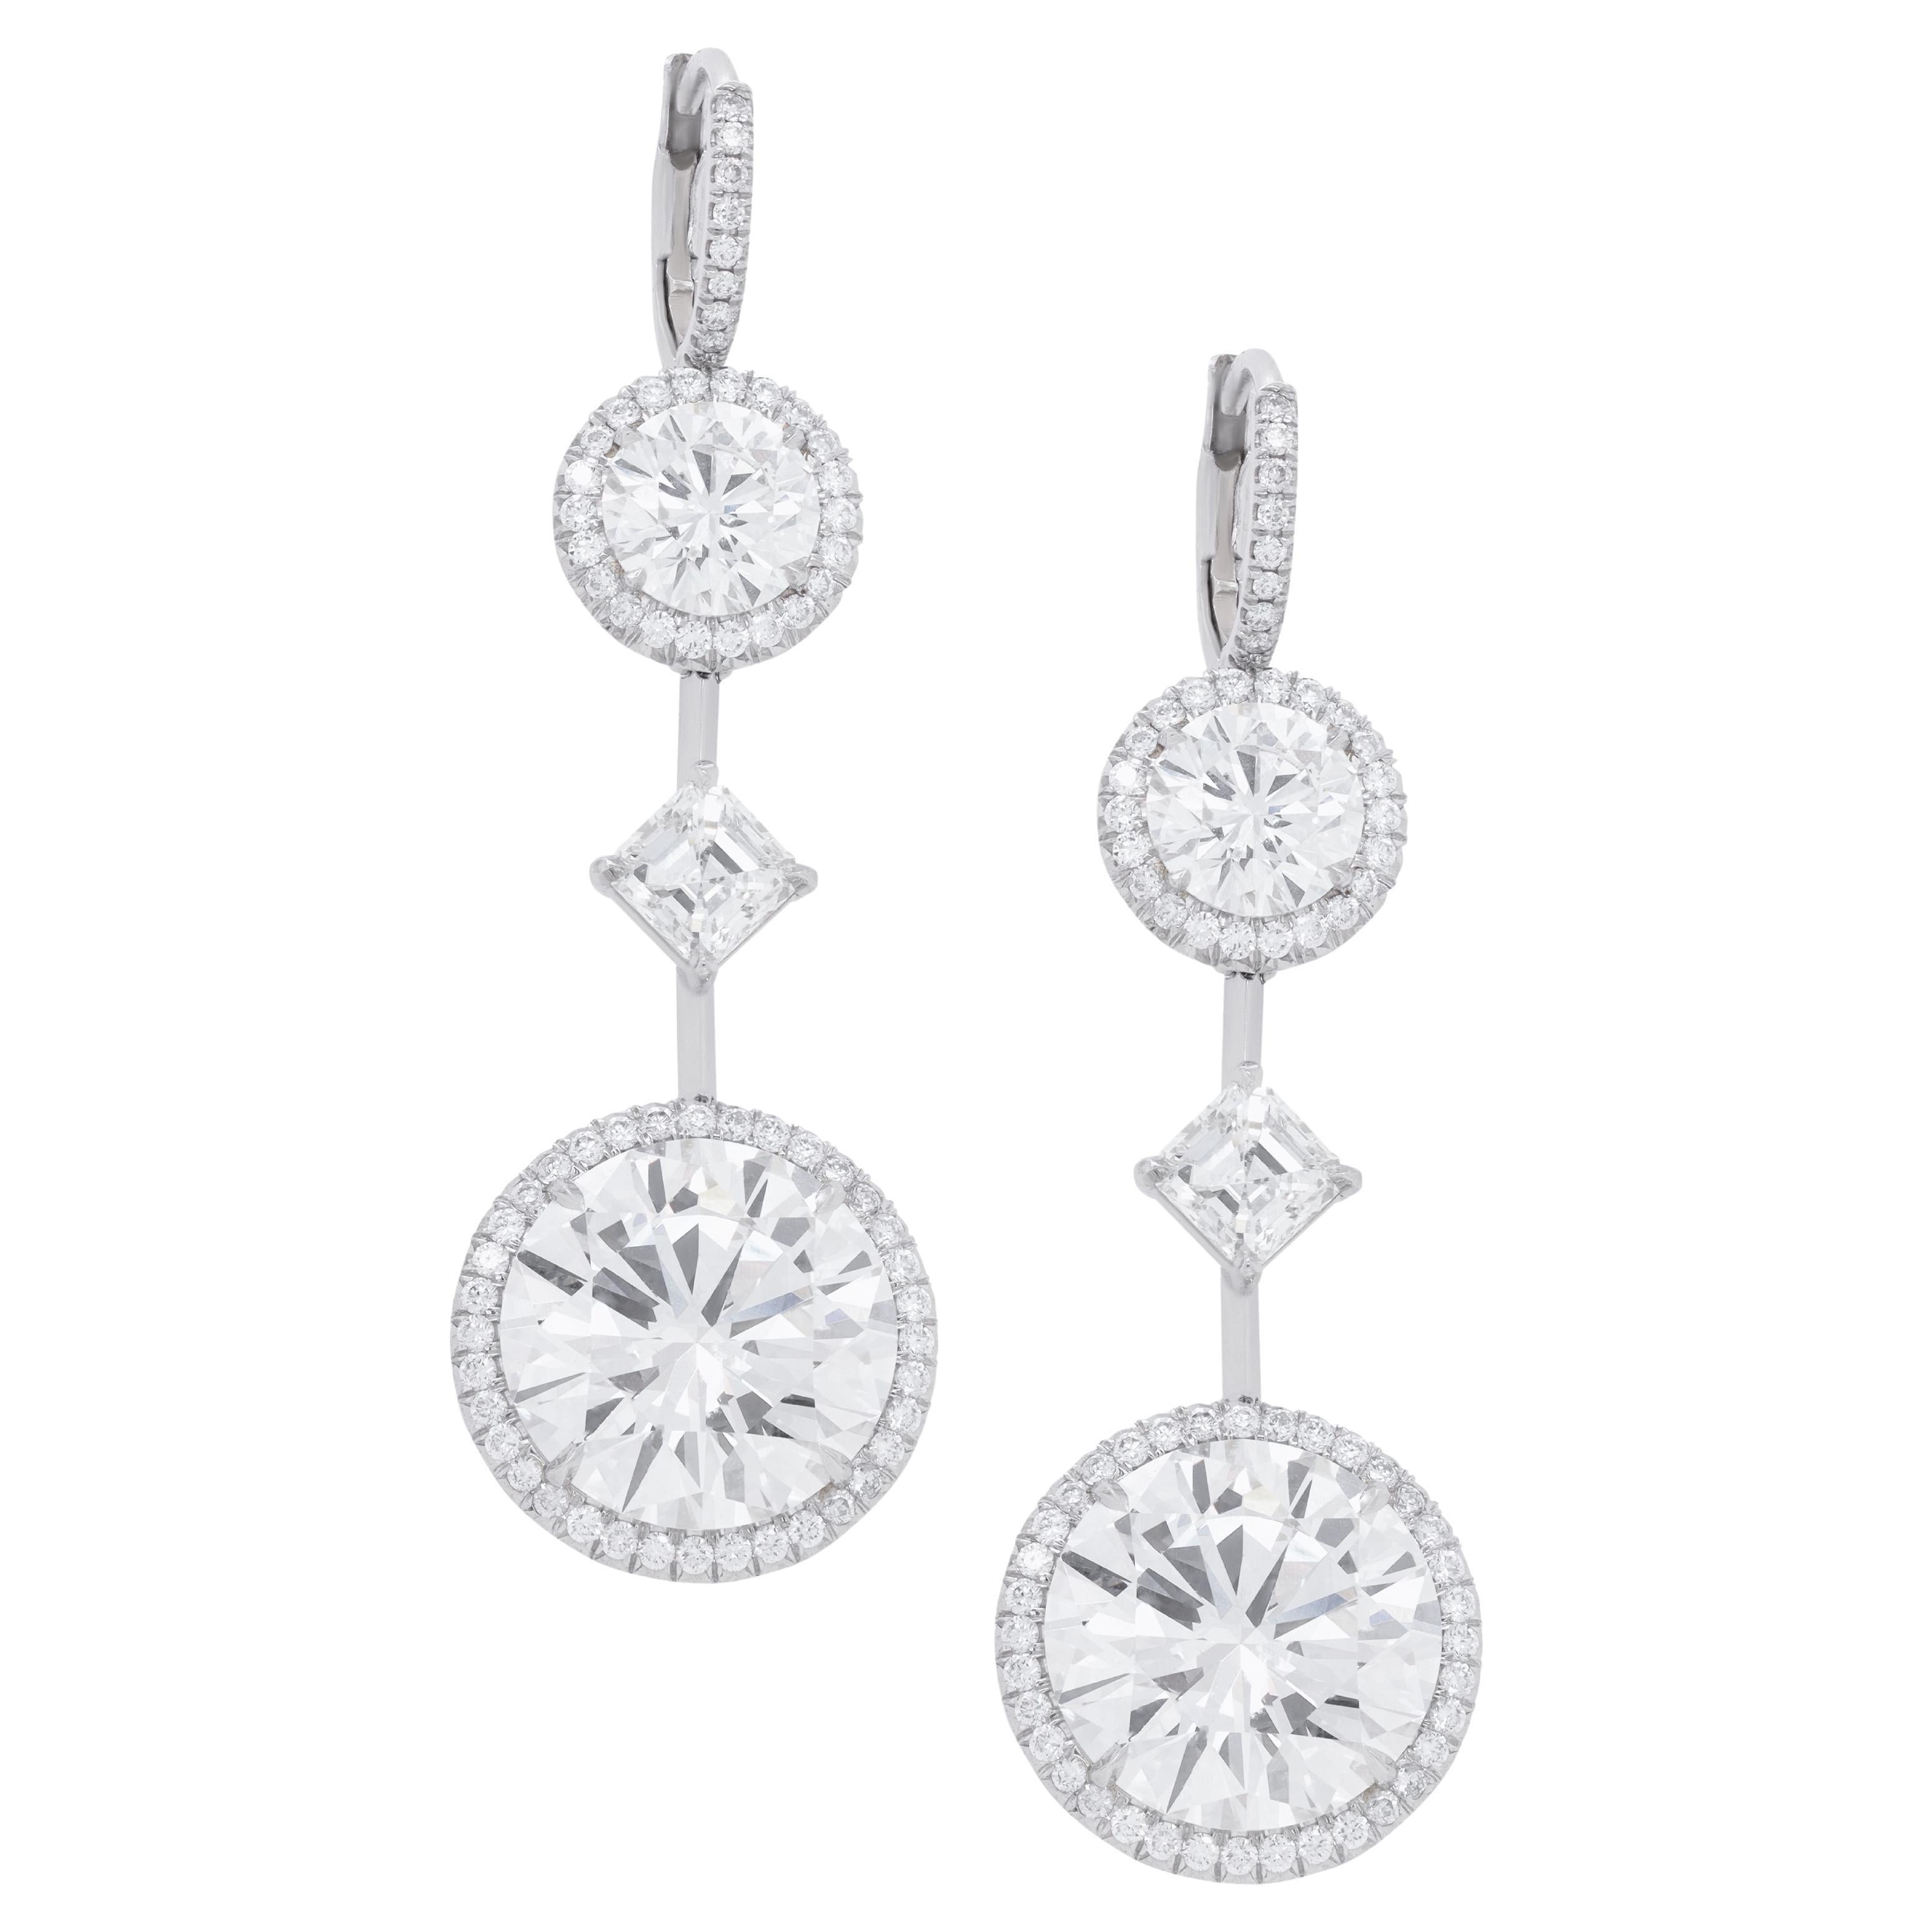 GIA Certified 19.19 Carat Important Diamond Earrings For Sale